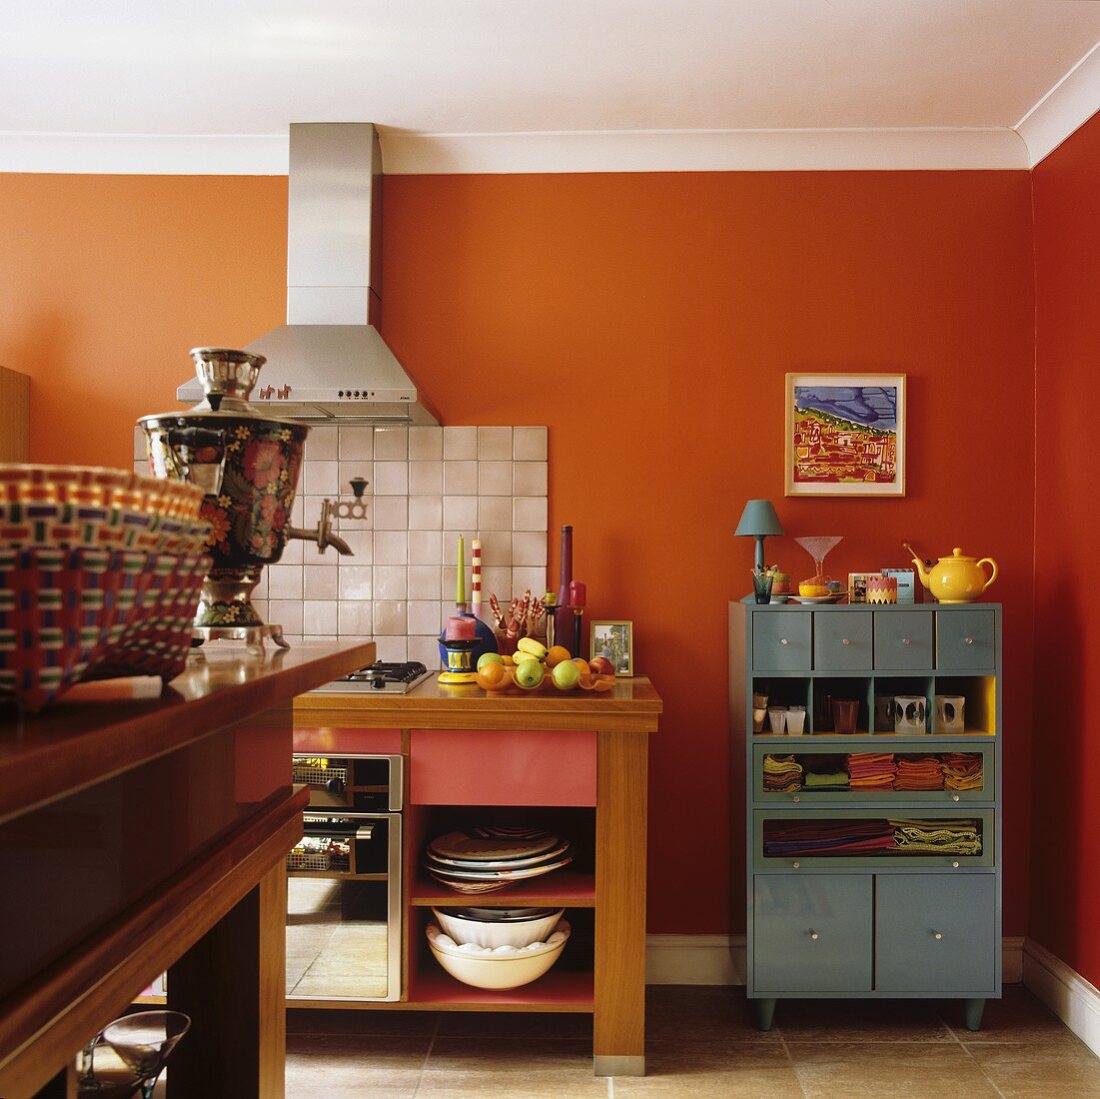 A kitchen in a country house with orange-painted walls and kitchen furnitures with a stainless steel extractor fan